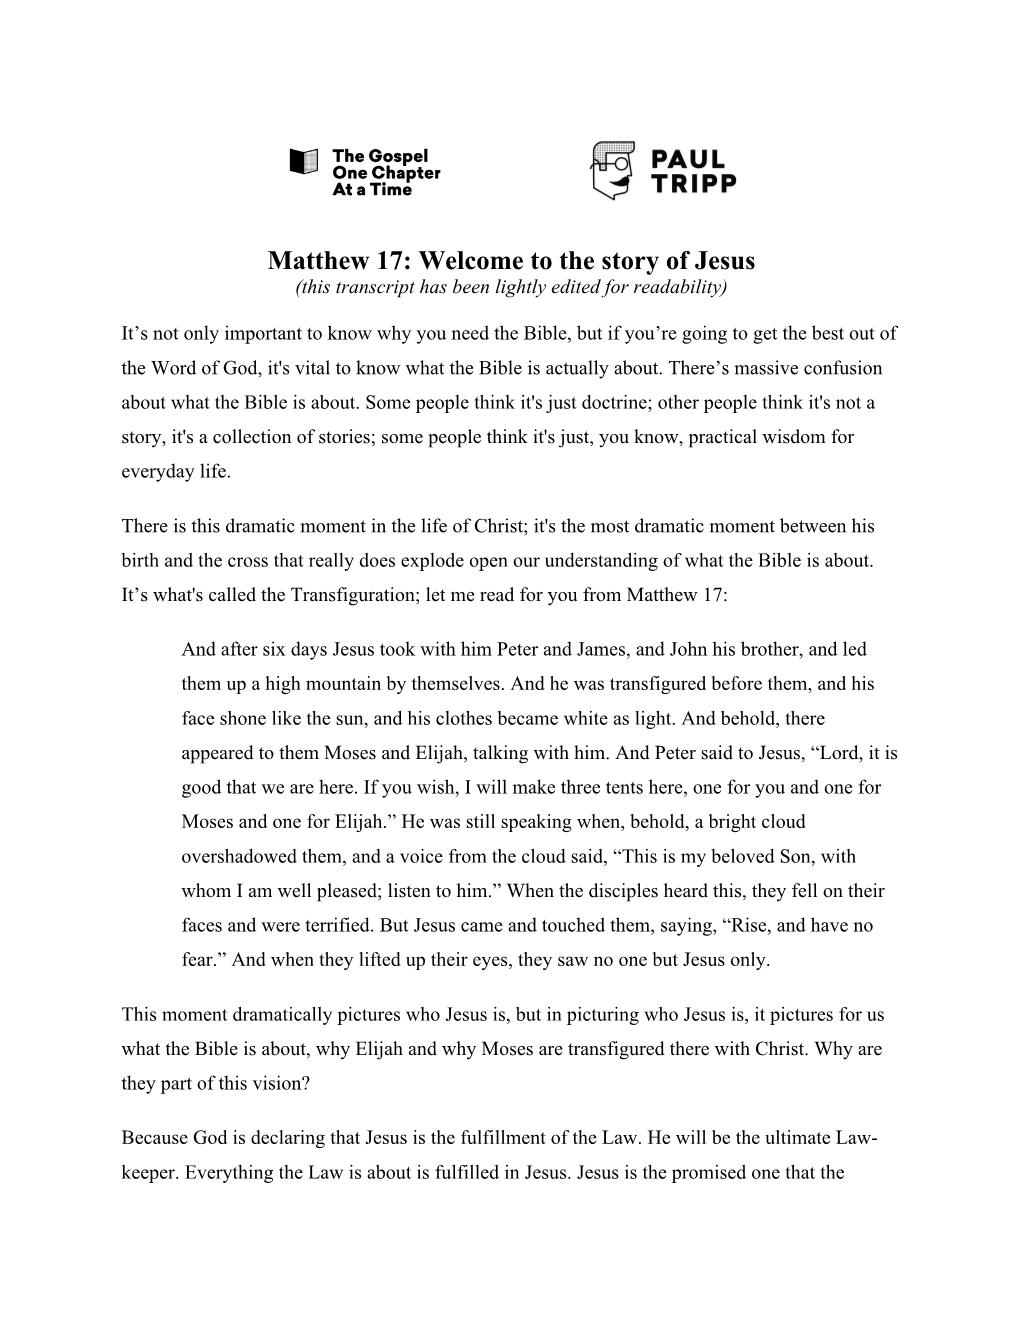 Matthew 17: Welcome to the Story of Jesus (This Transcript Has Been Lightly Edited for Readability)